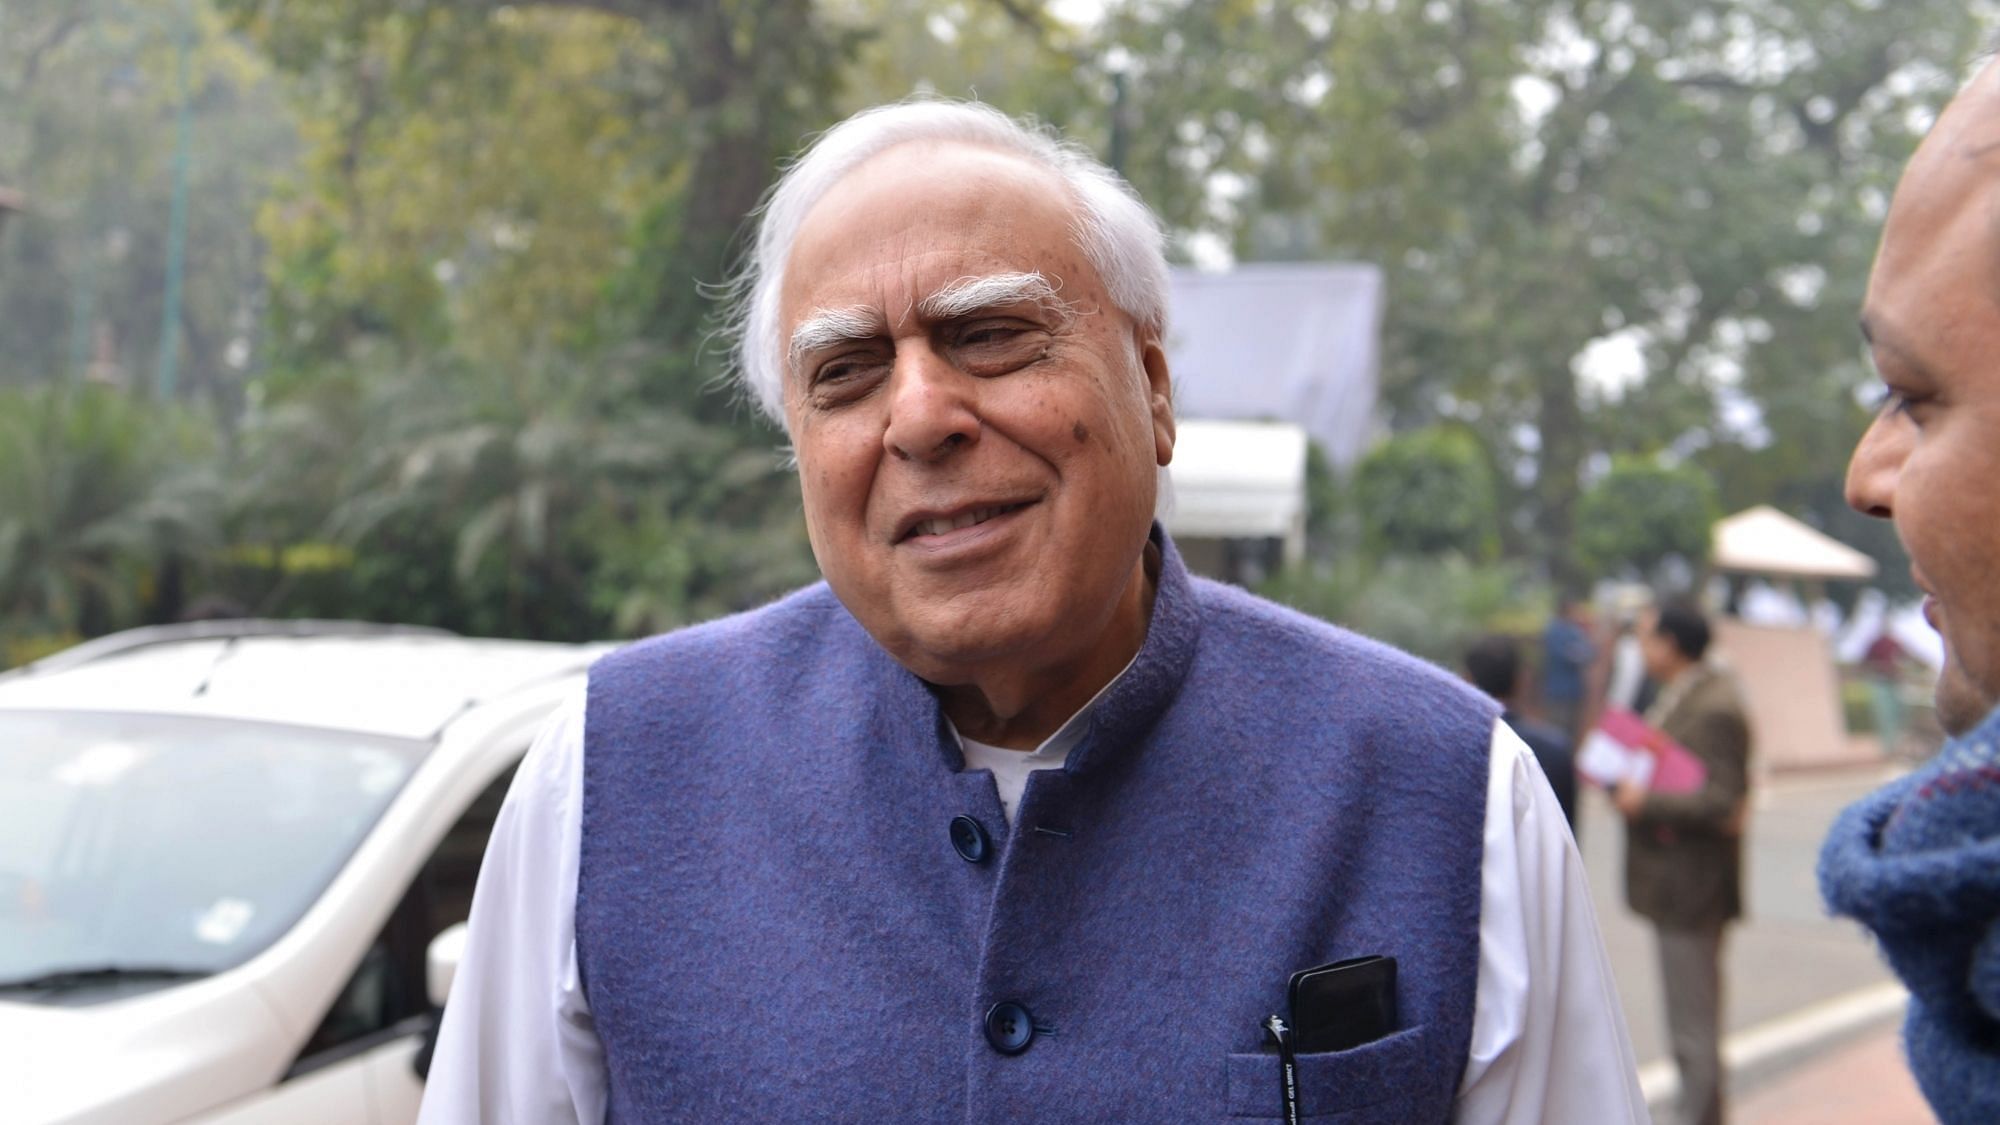 Referring to the Congress’s poor show in recent elections, Sibal had said that the party is “in a sorry state of affairs”.